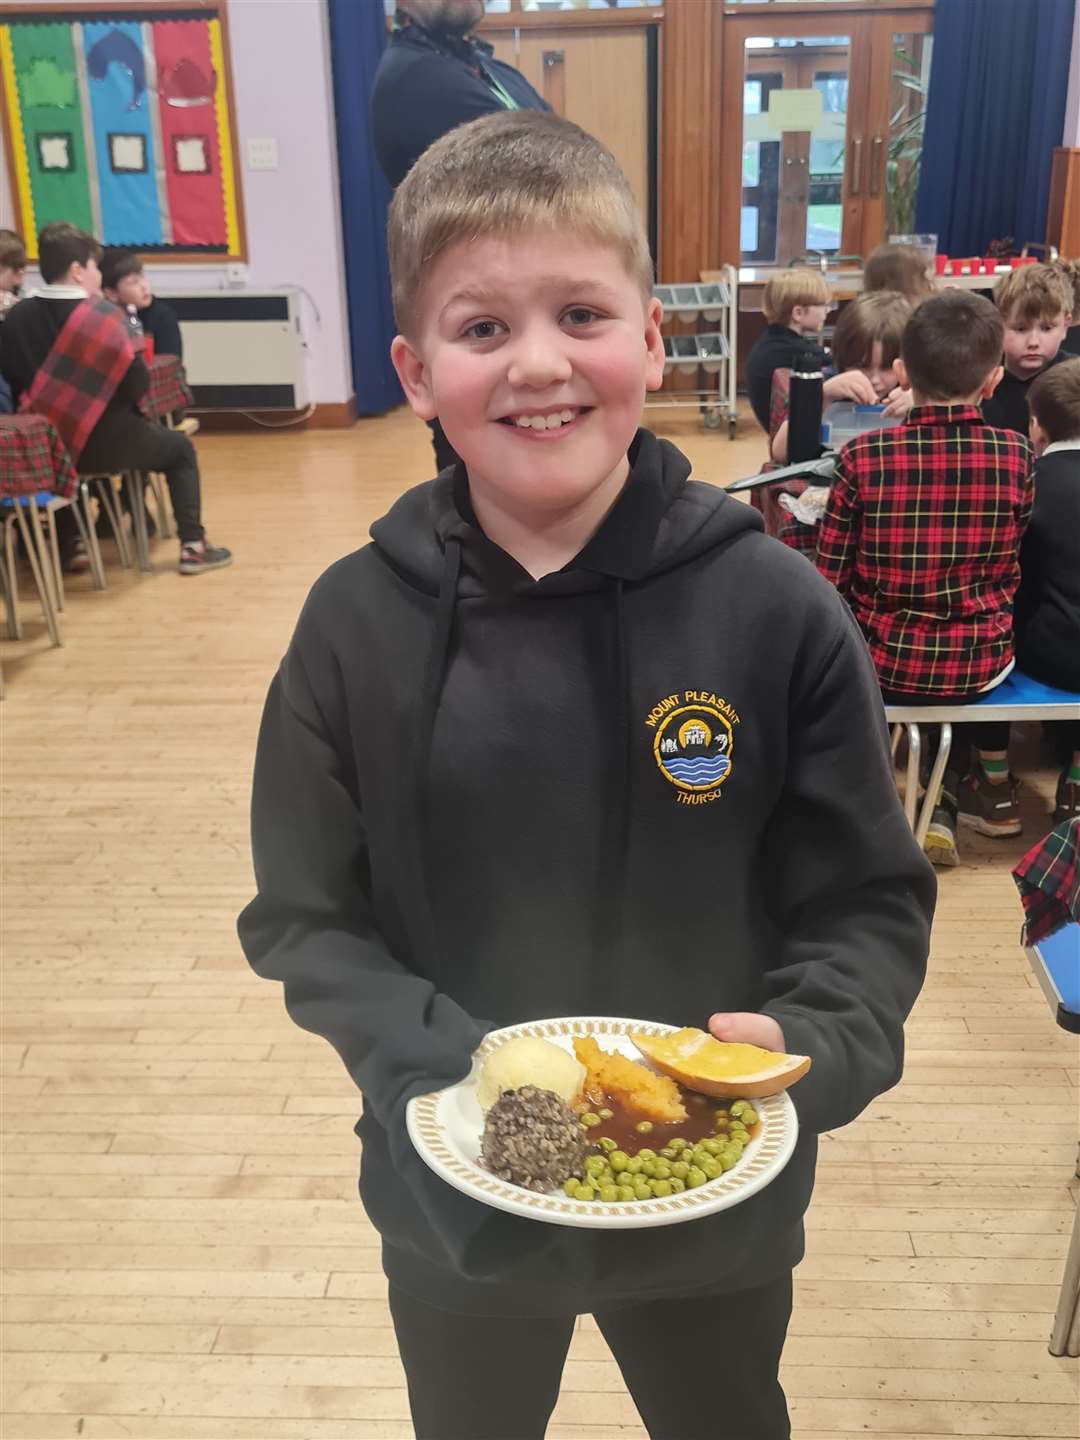 Haggis, neeps and tatties – along with peas and gravy – were served up for the pupils.